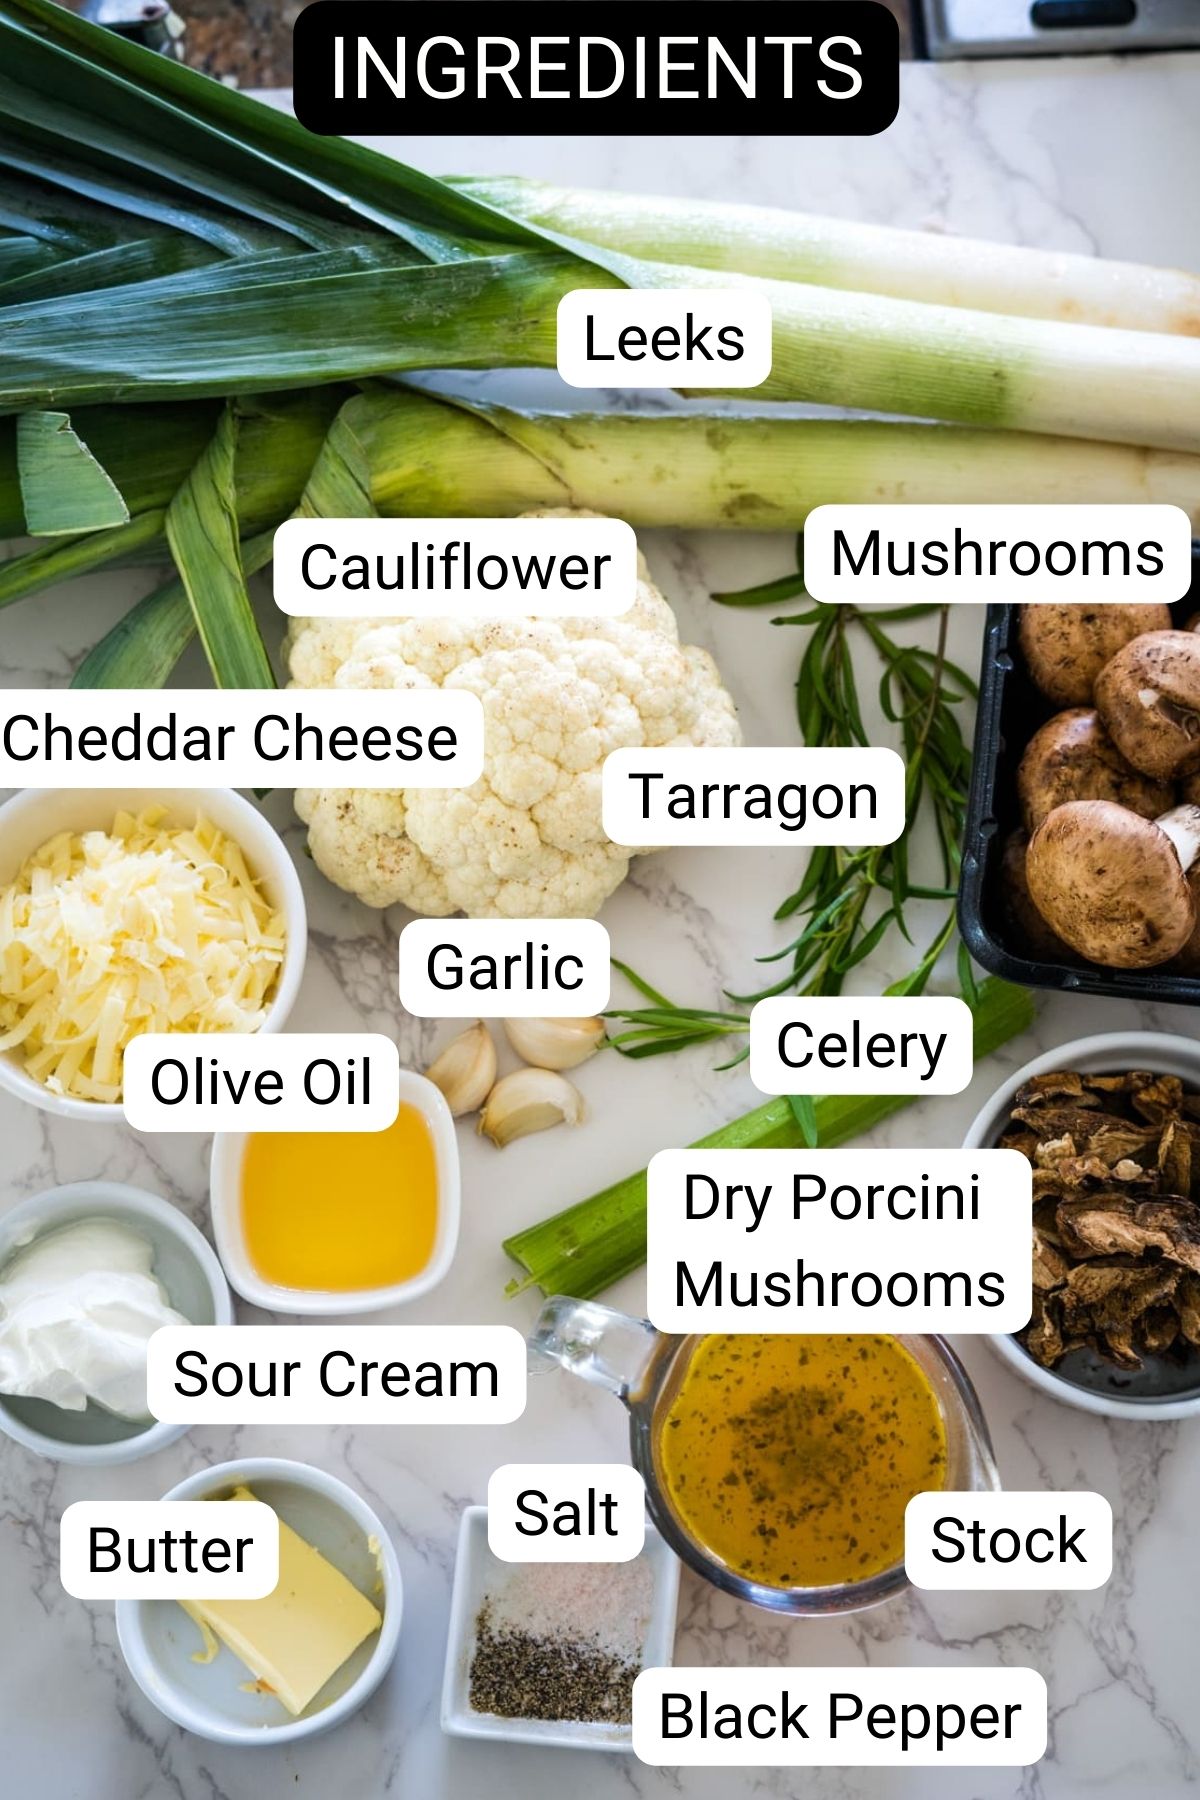 A list of ingredients for a cauliflower mushroom and leek risotto.